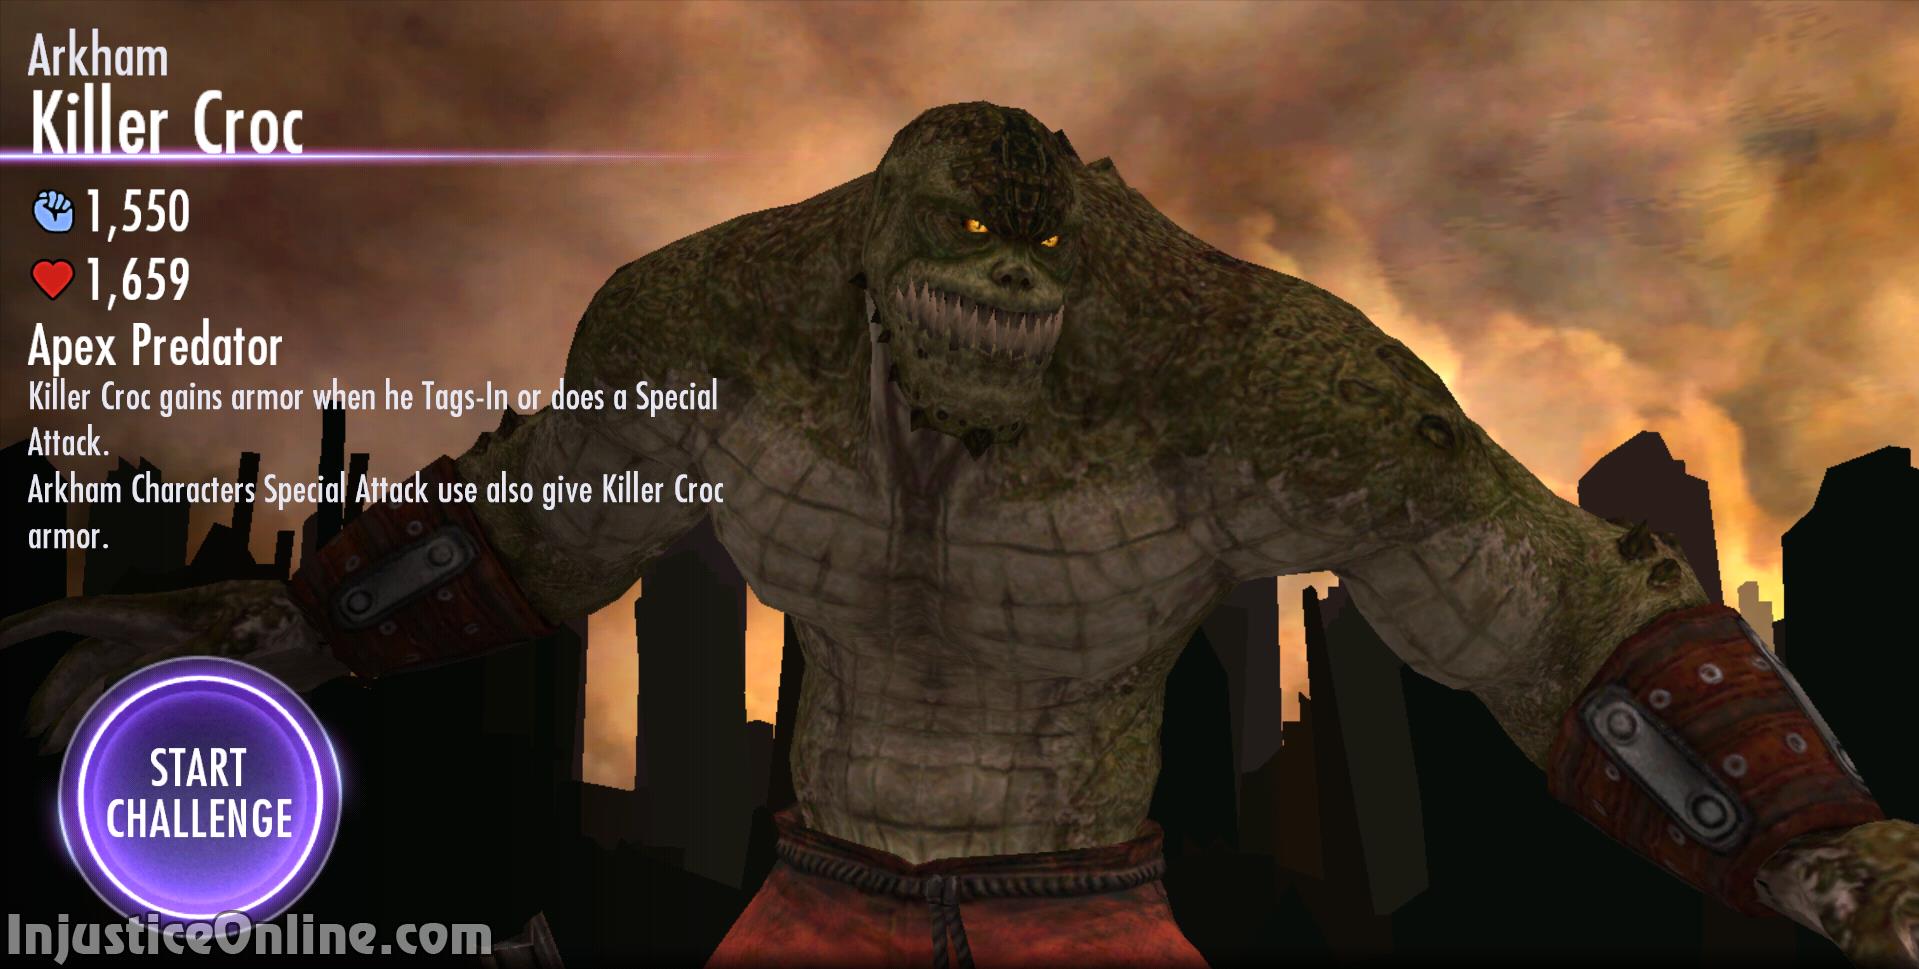 Killer Croc also appeared in the Injustice: Gods Among Us comics. 